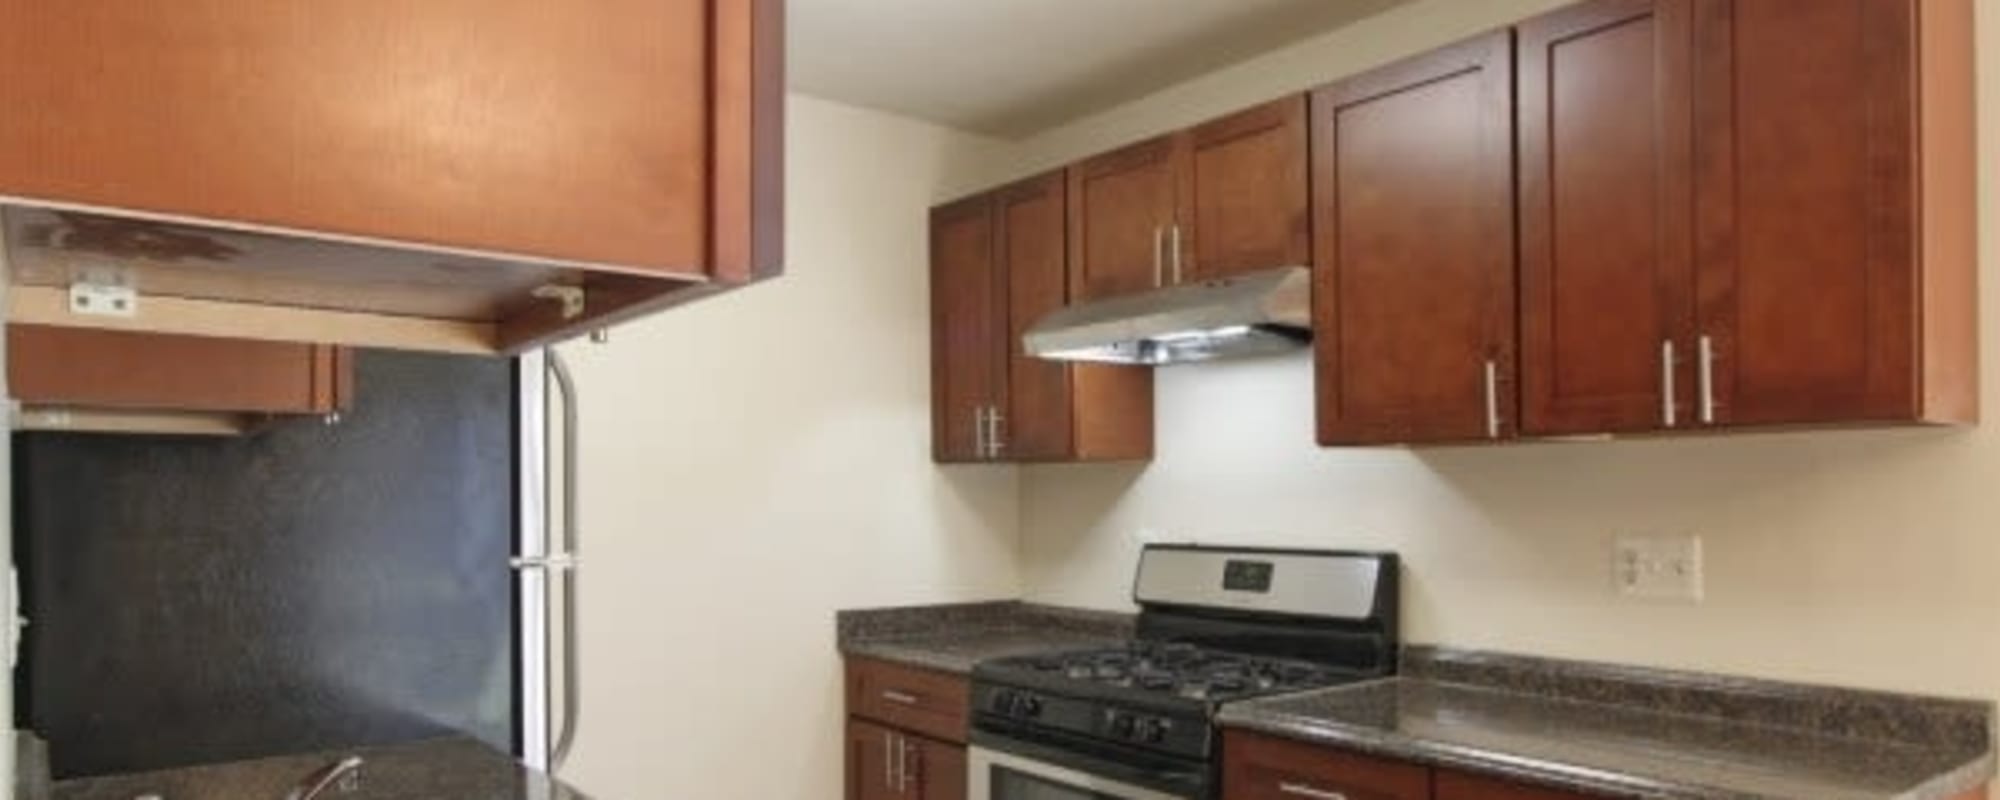 Apartment kitchen with stainless steel finishes at Chelsea Park in Gaithersburg, Maryland